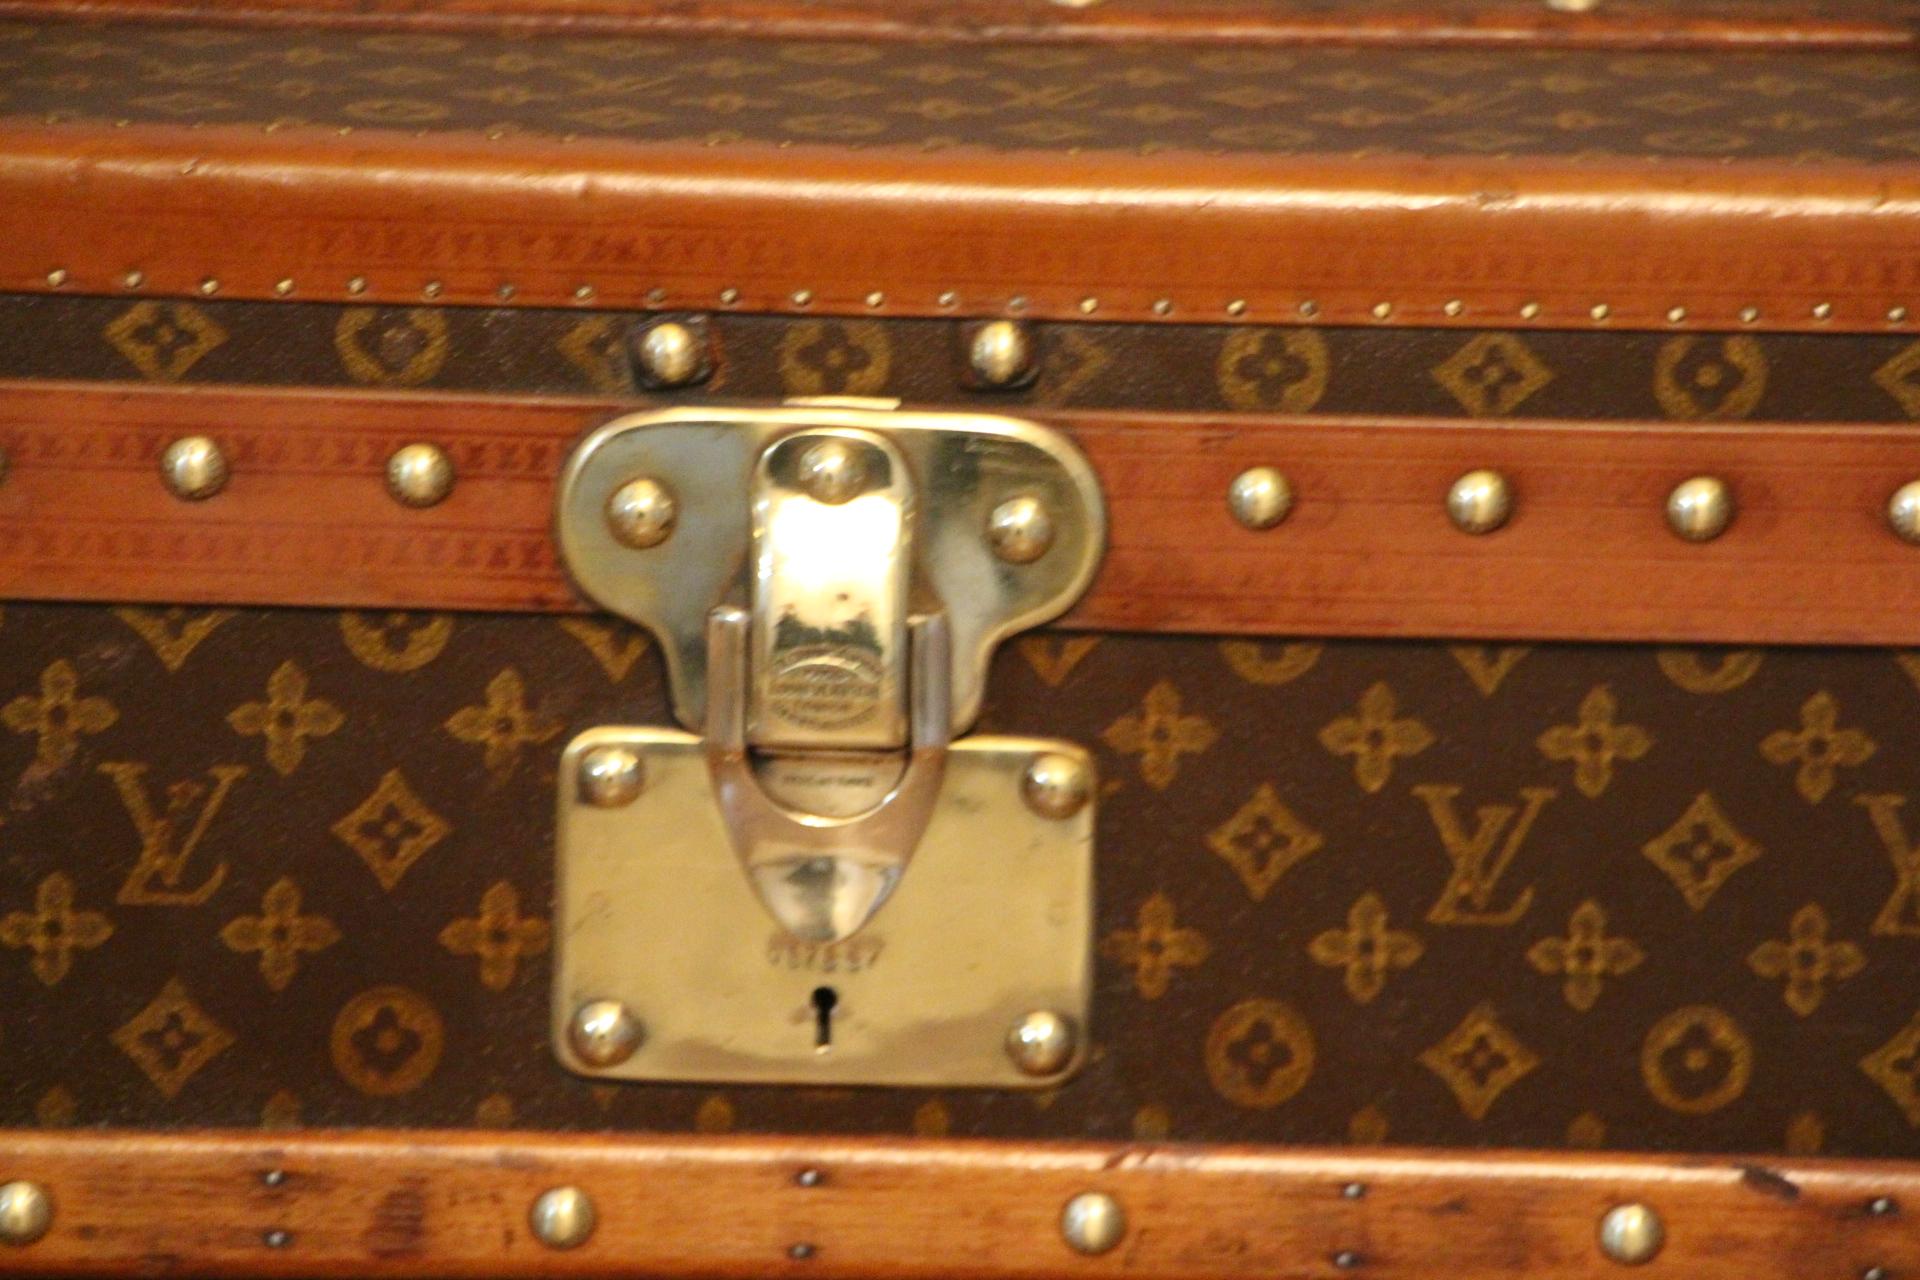 This beautiful Louis Vuitton trunk features stenciled hand painted monogram canvas and honey color lozine trim.
All solid brass LV stamped studs and locks as well as solid brass corners.
Leather handles on each side.
Its interior is all original